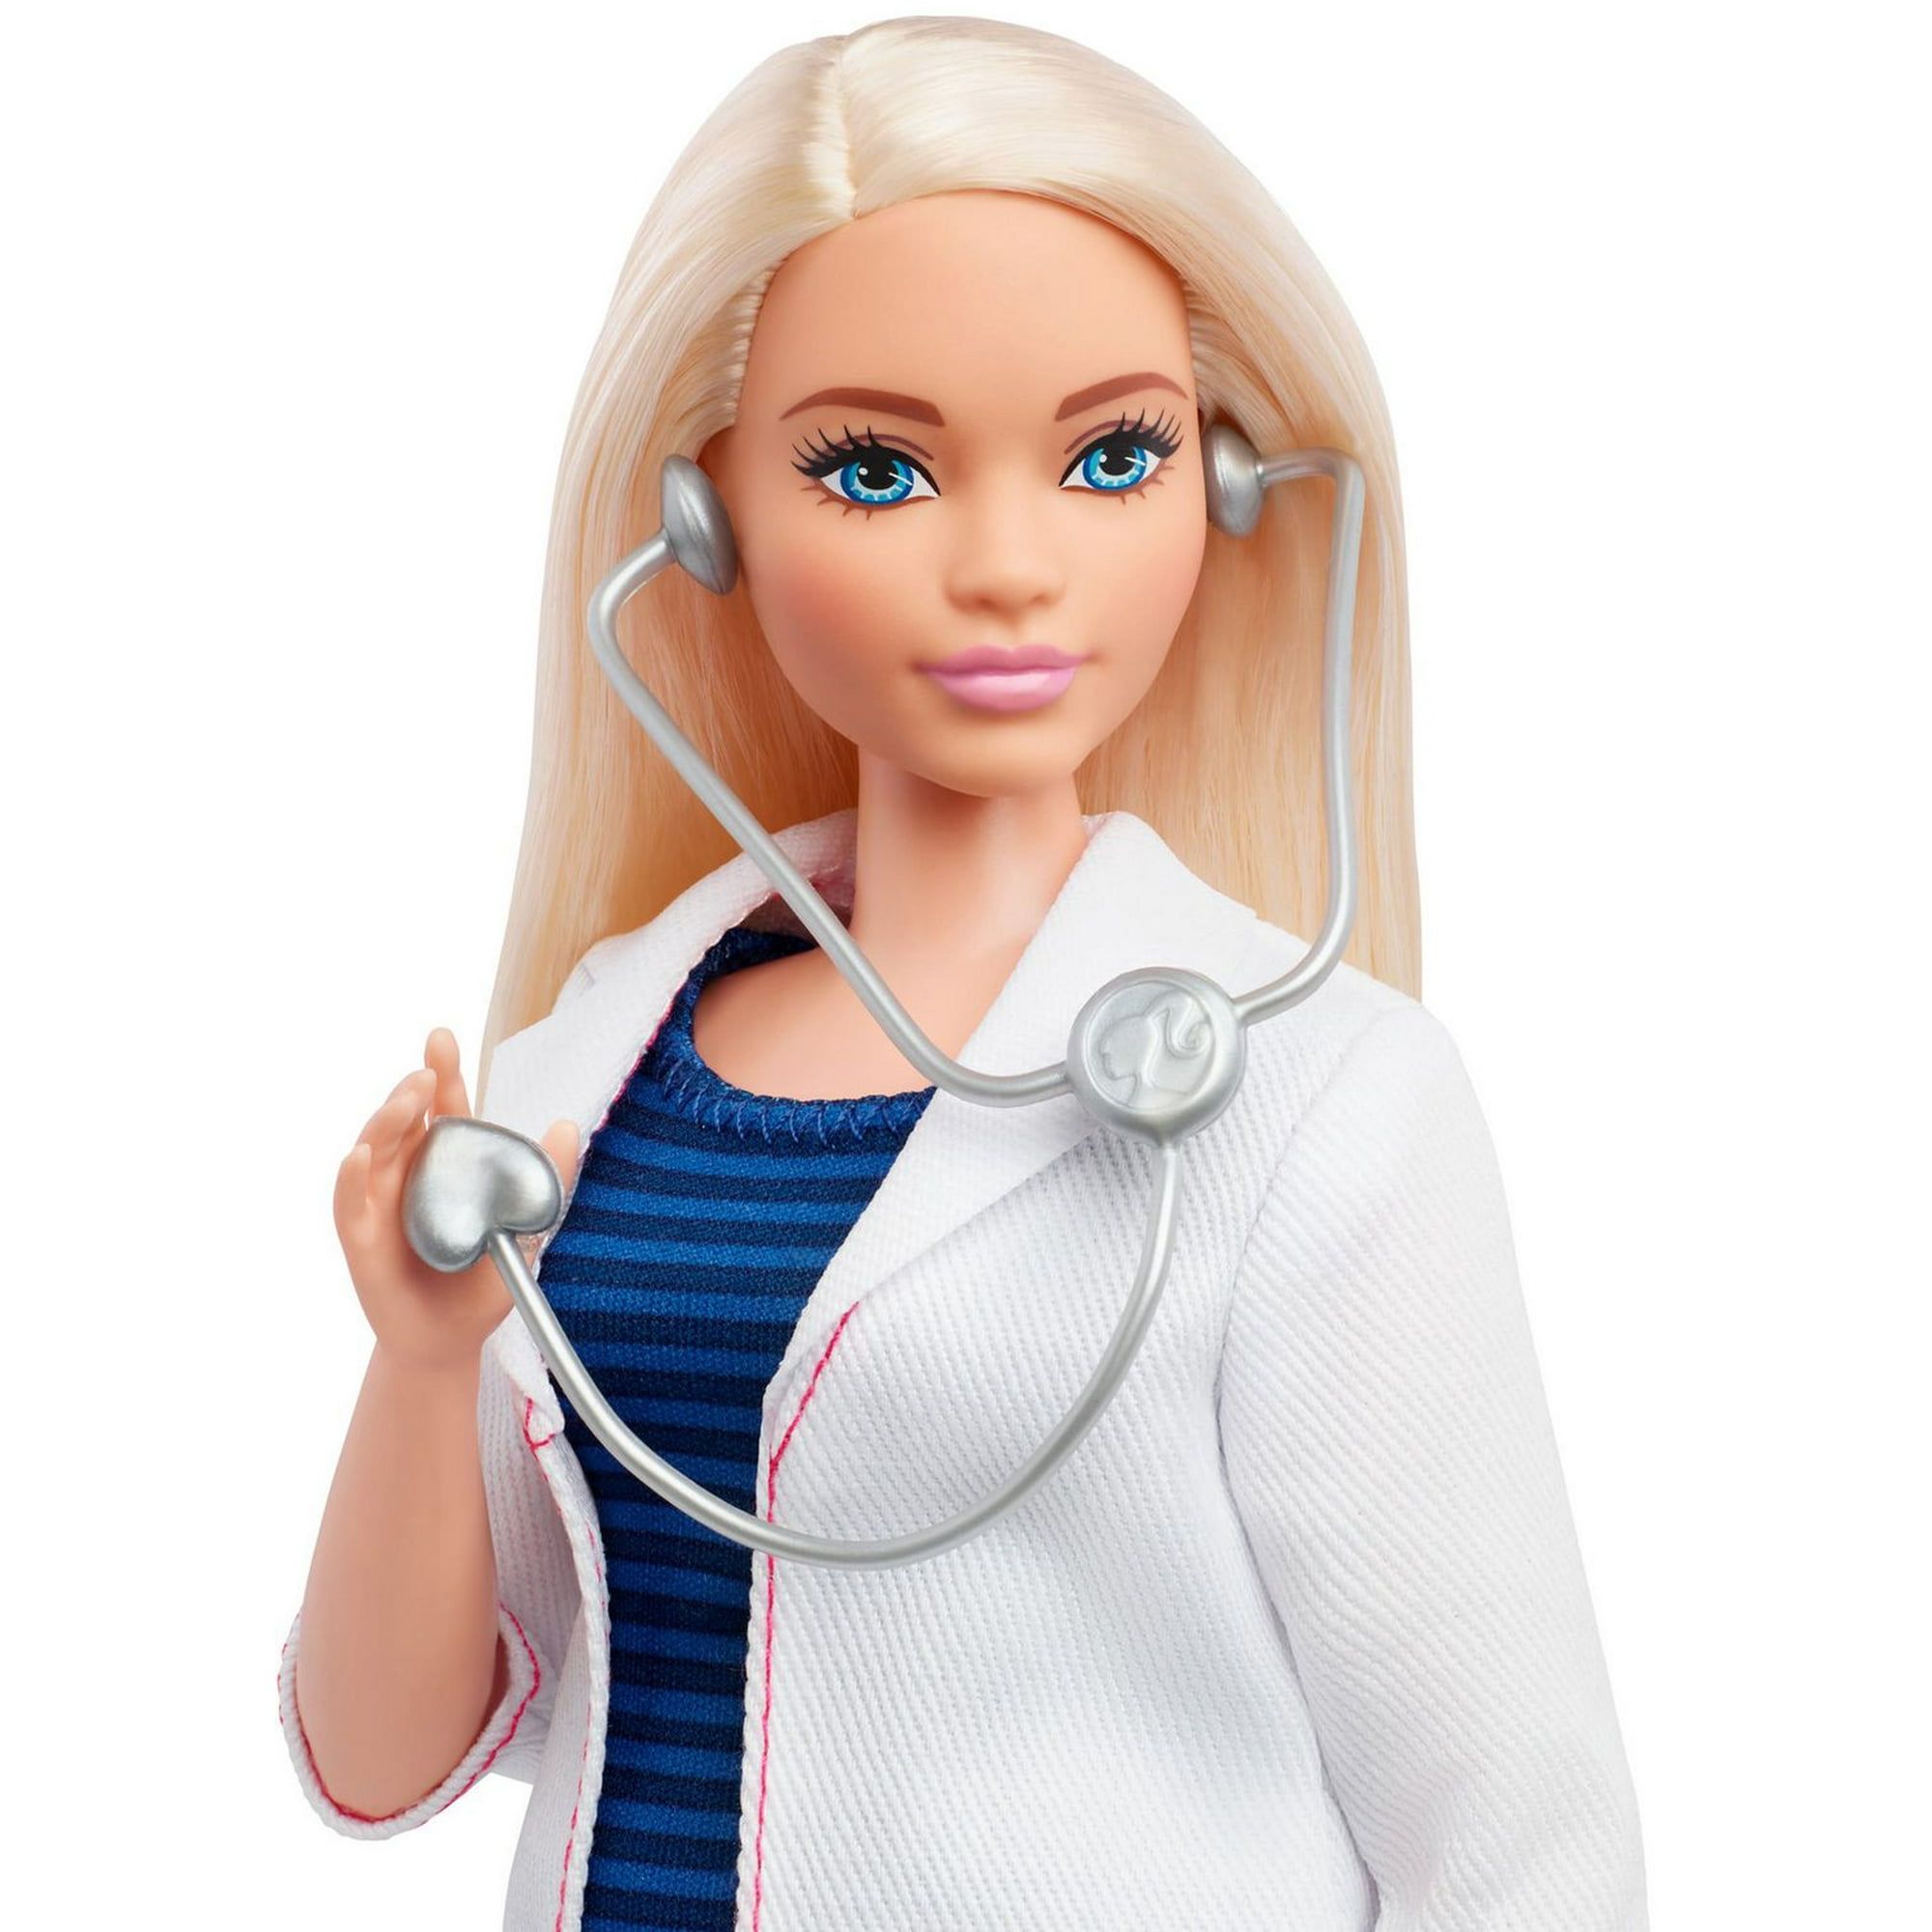 Barbie Doctor Fashion Doll Dressed in Doctor Coat with Curvy Shape &  Medical Accessories 